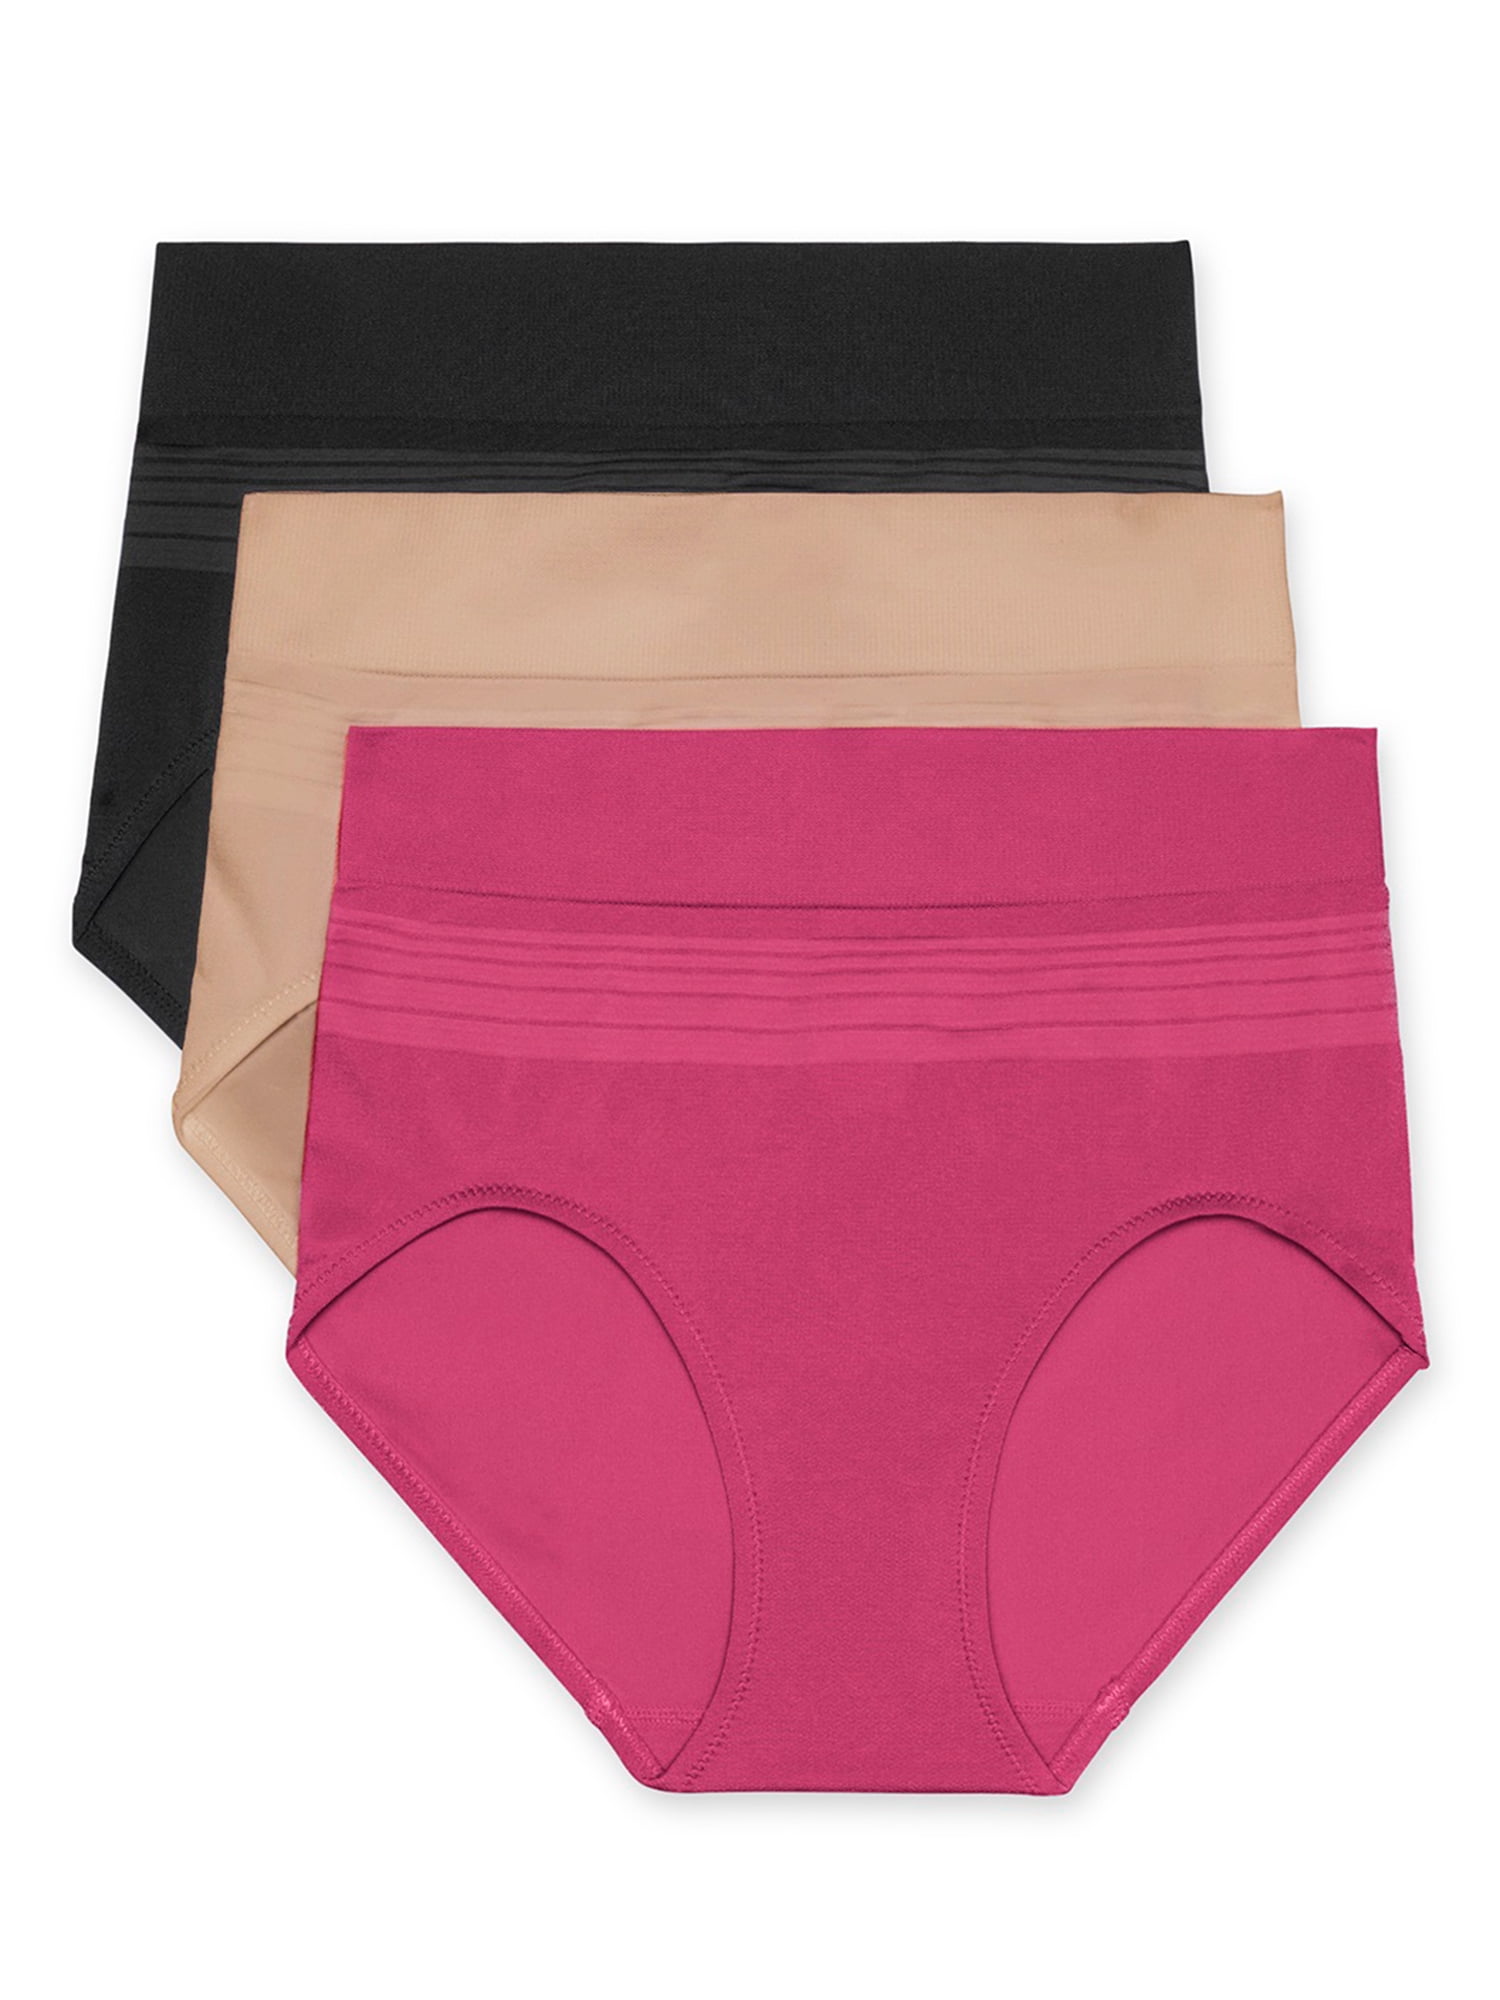 Photo 1 of Blissful Benefits by Warner's Women's No Muffin Top Seamless Brief, 3-Pack